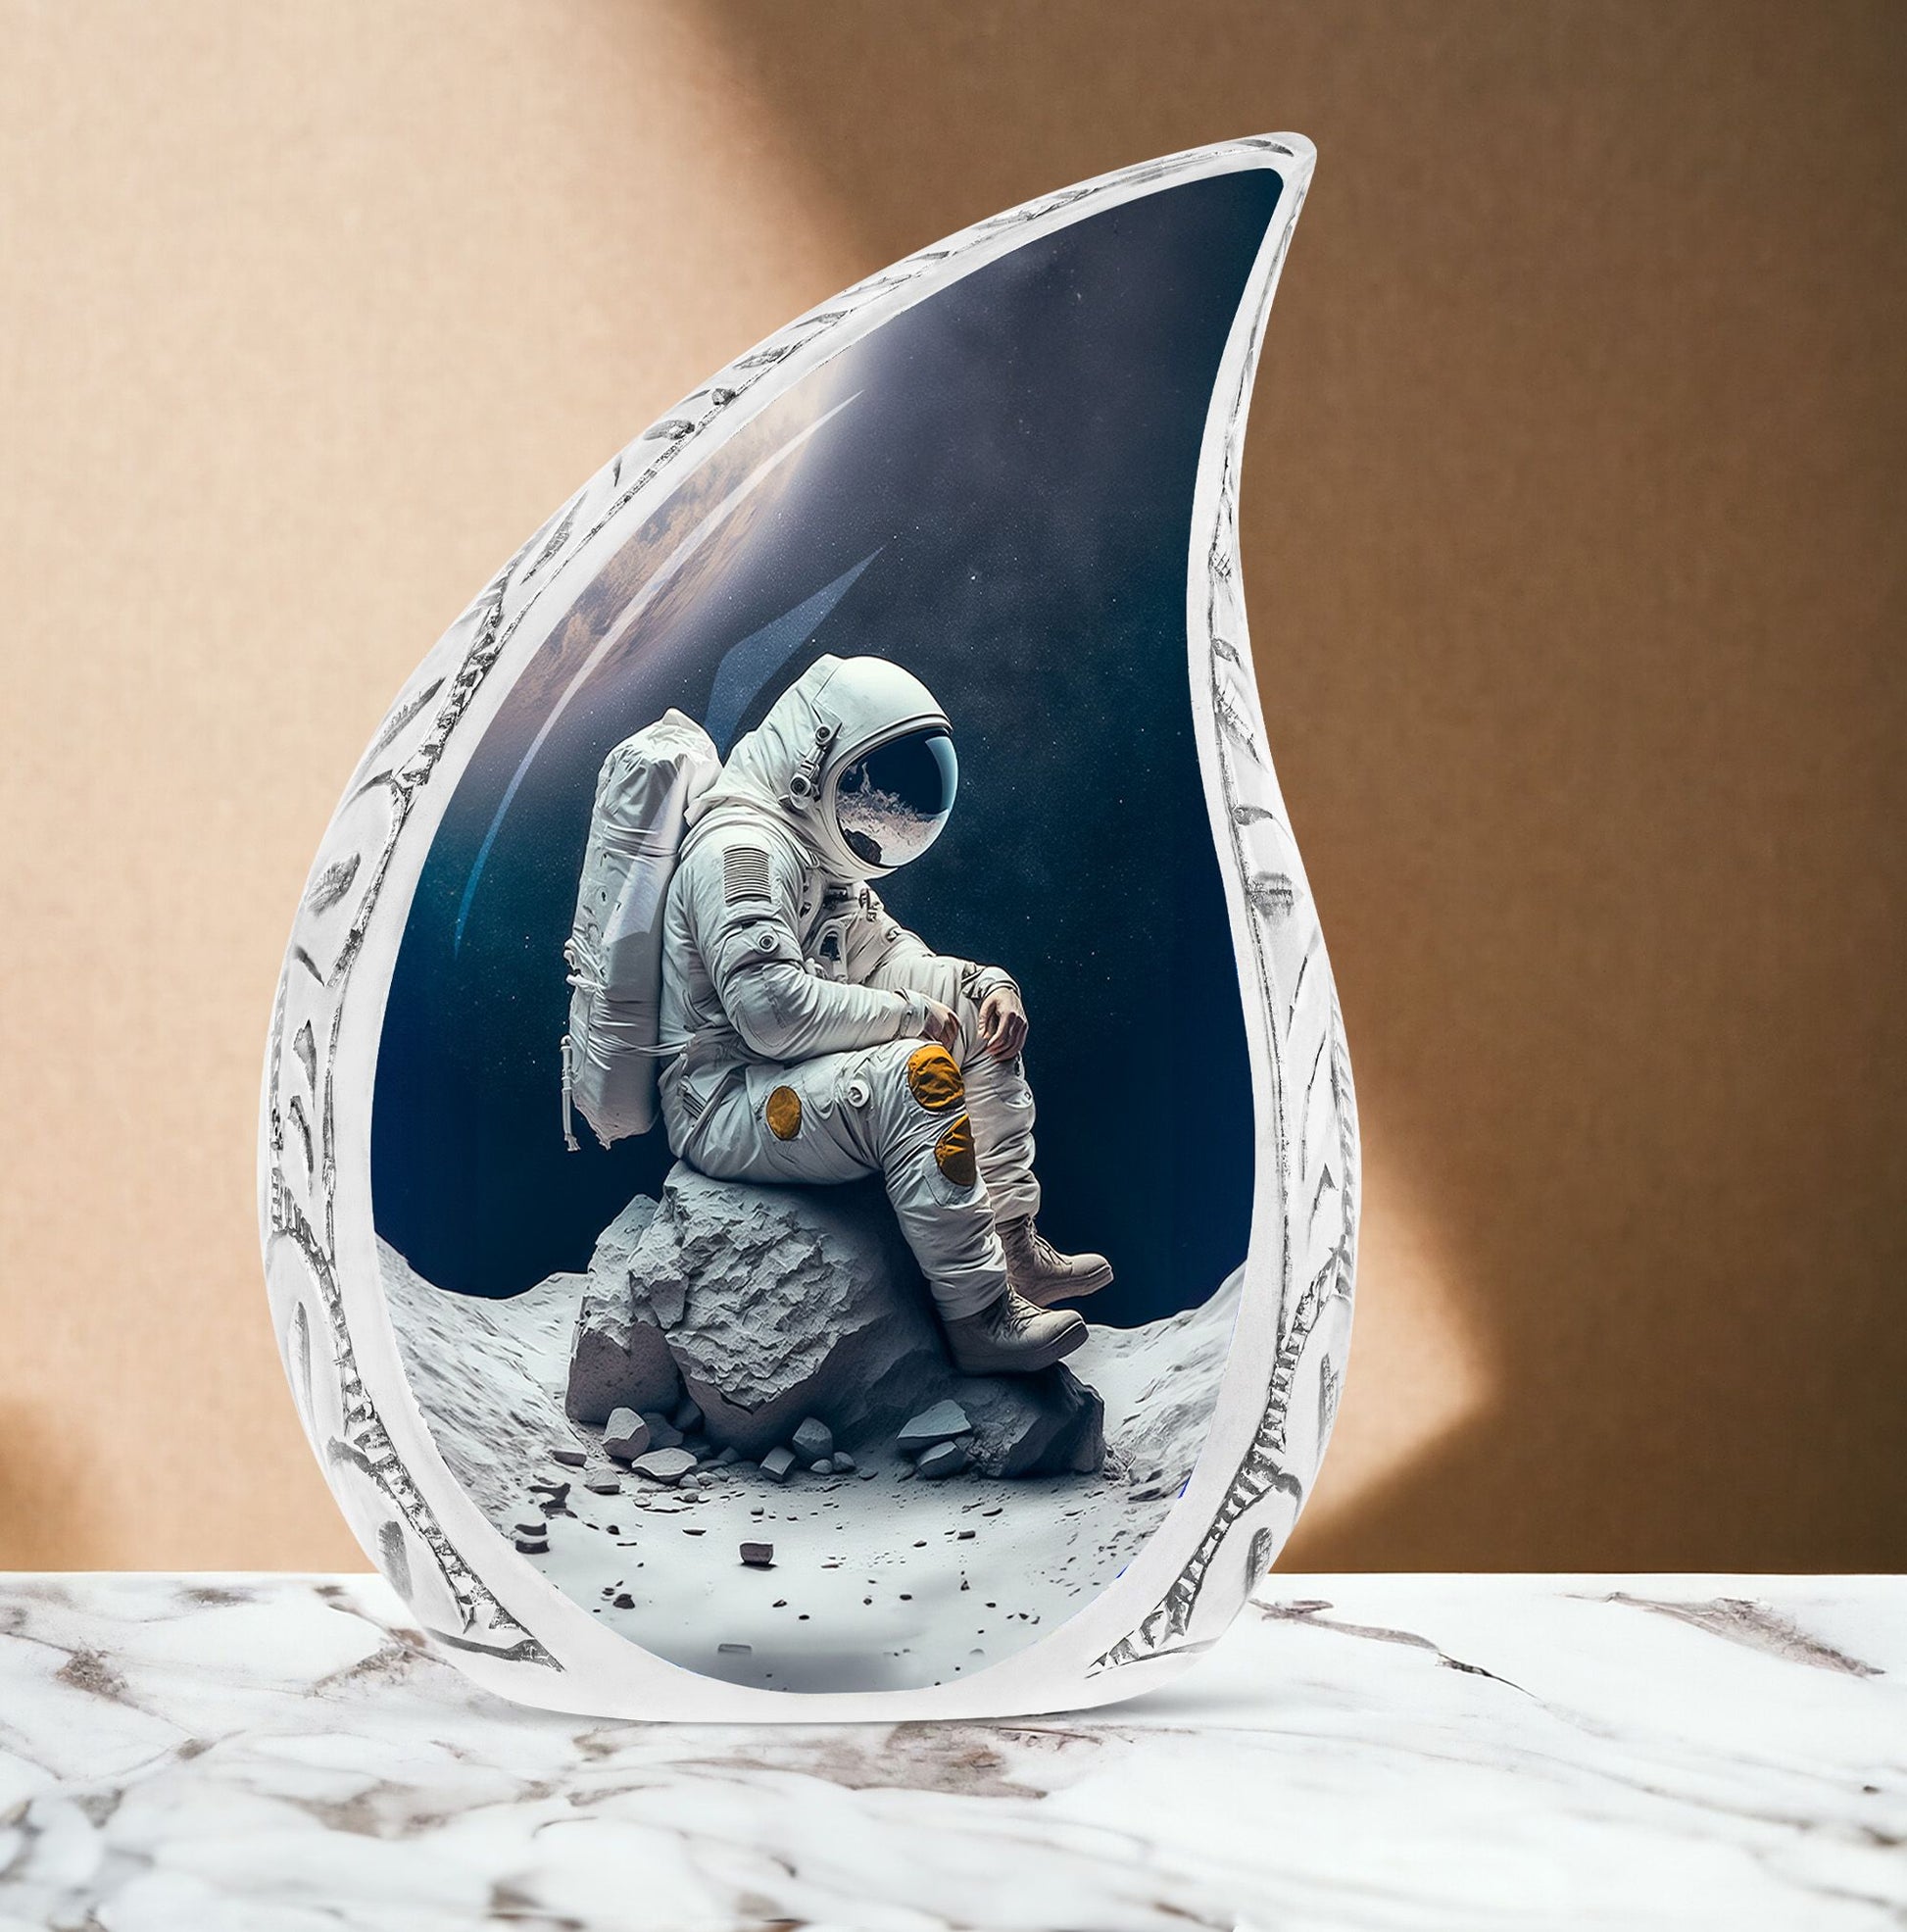 Large Astronaut Suit inspired Cremation Companion Urn, sitting on cracked stone, ideal for Adult men's ashes